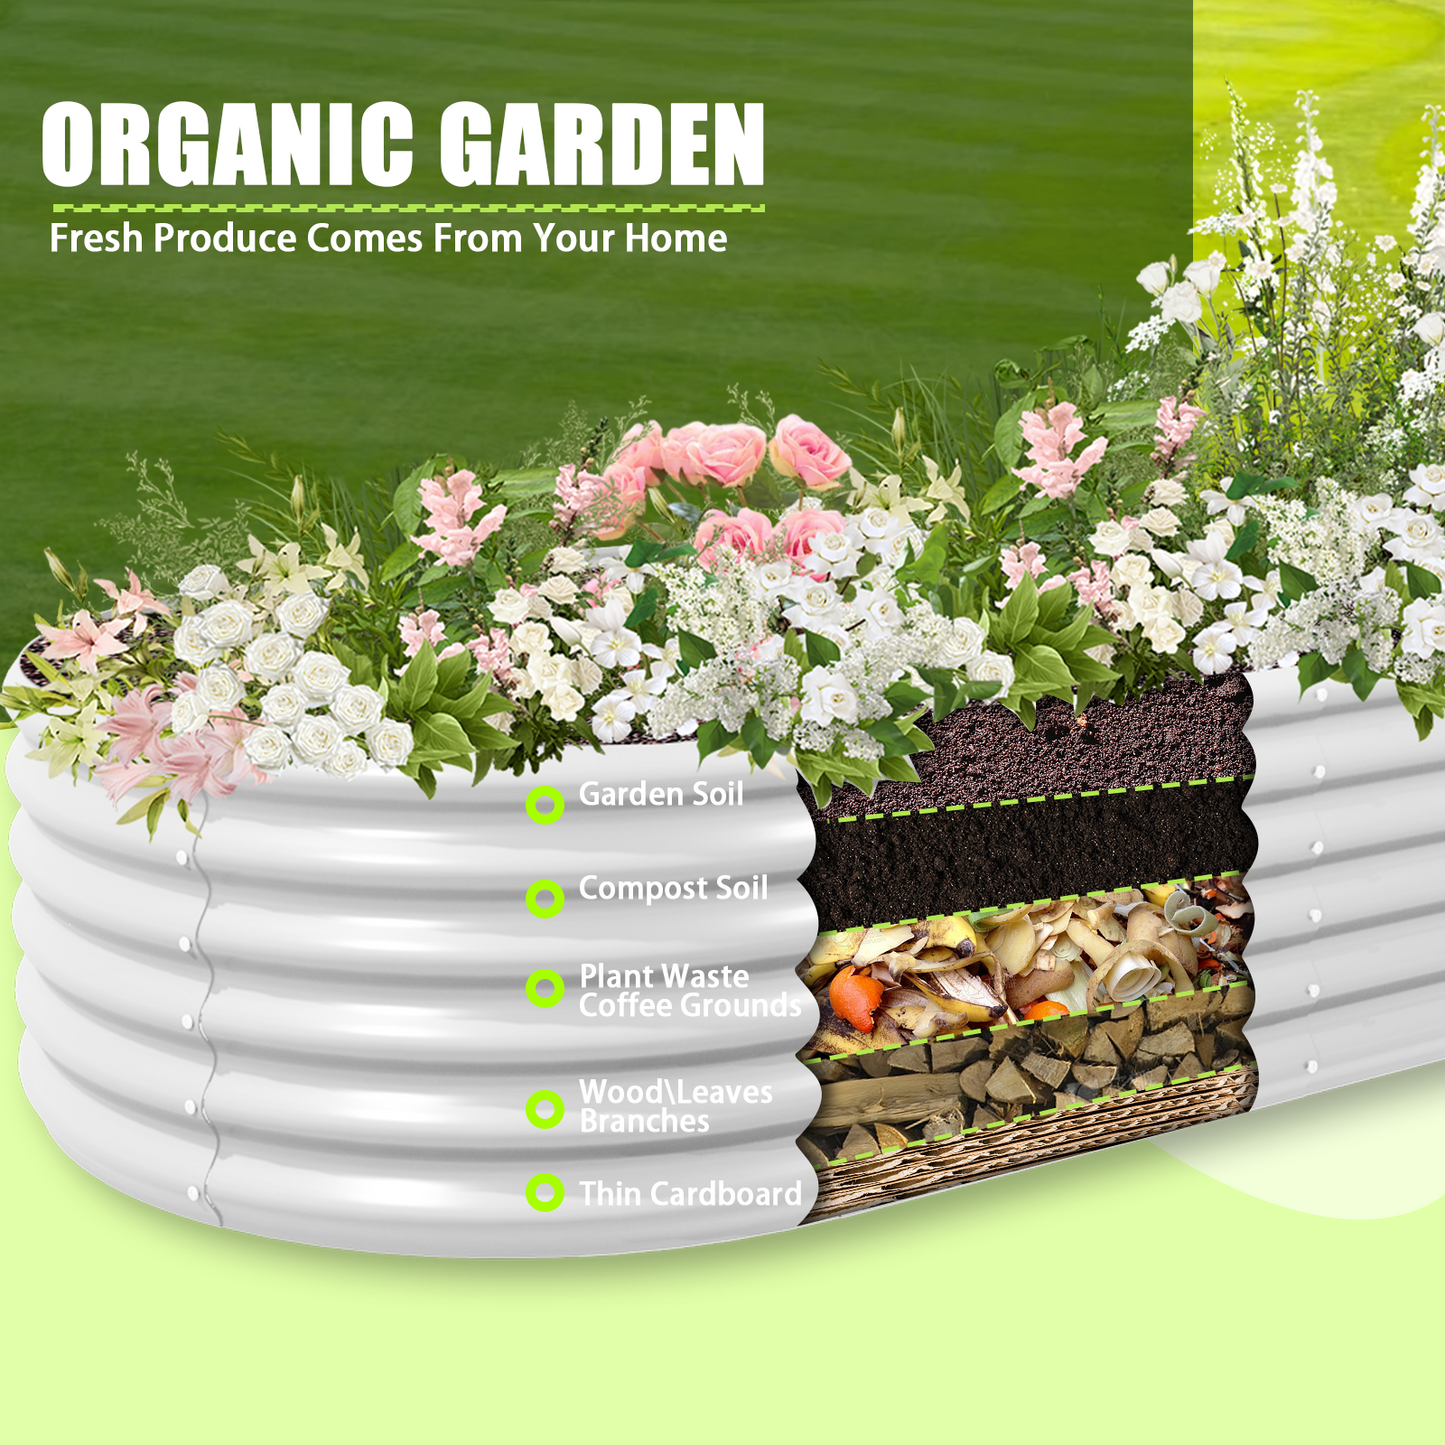 40%OFF! Set of 6: 12x3x1.5ft Oval Modular Metal Raised Garden Bed (White)